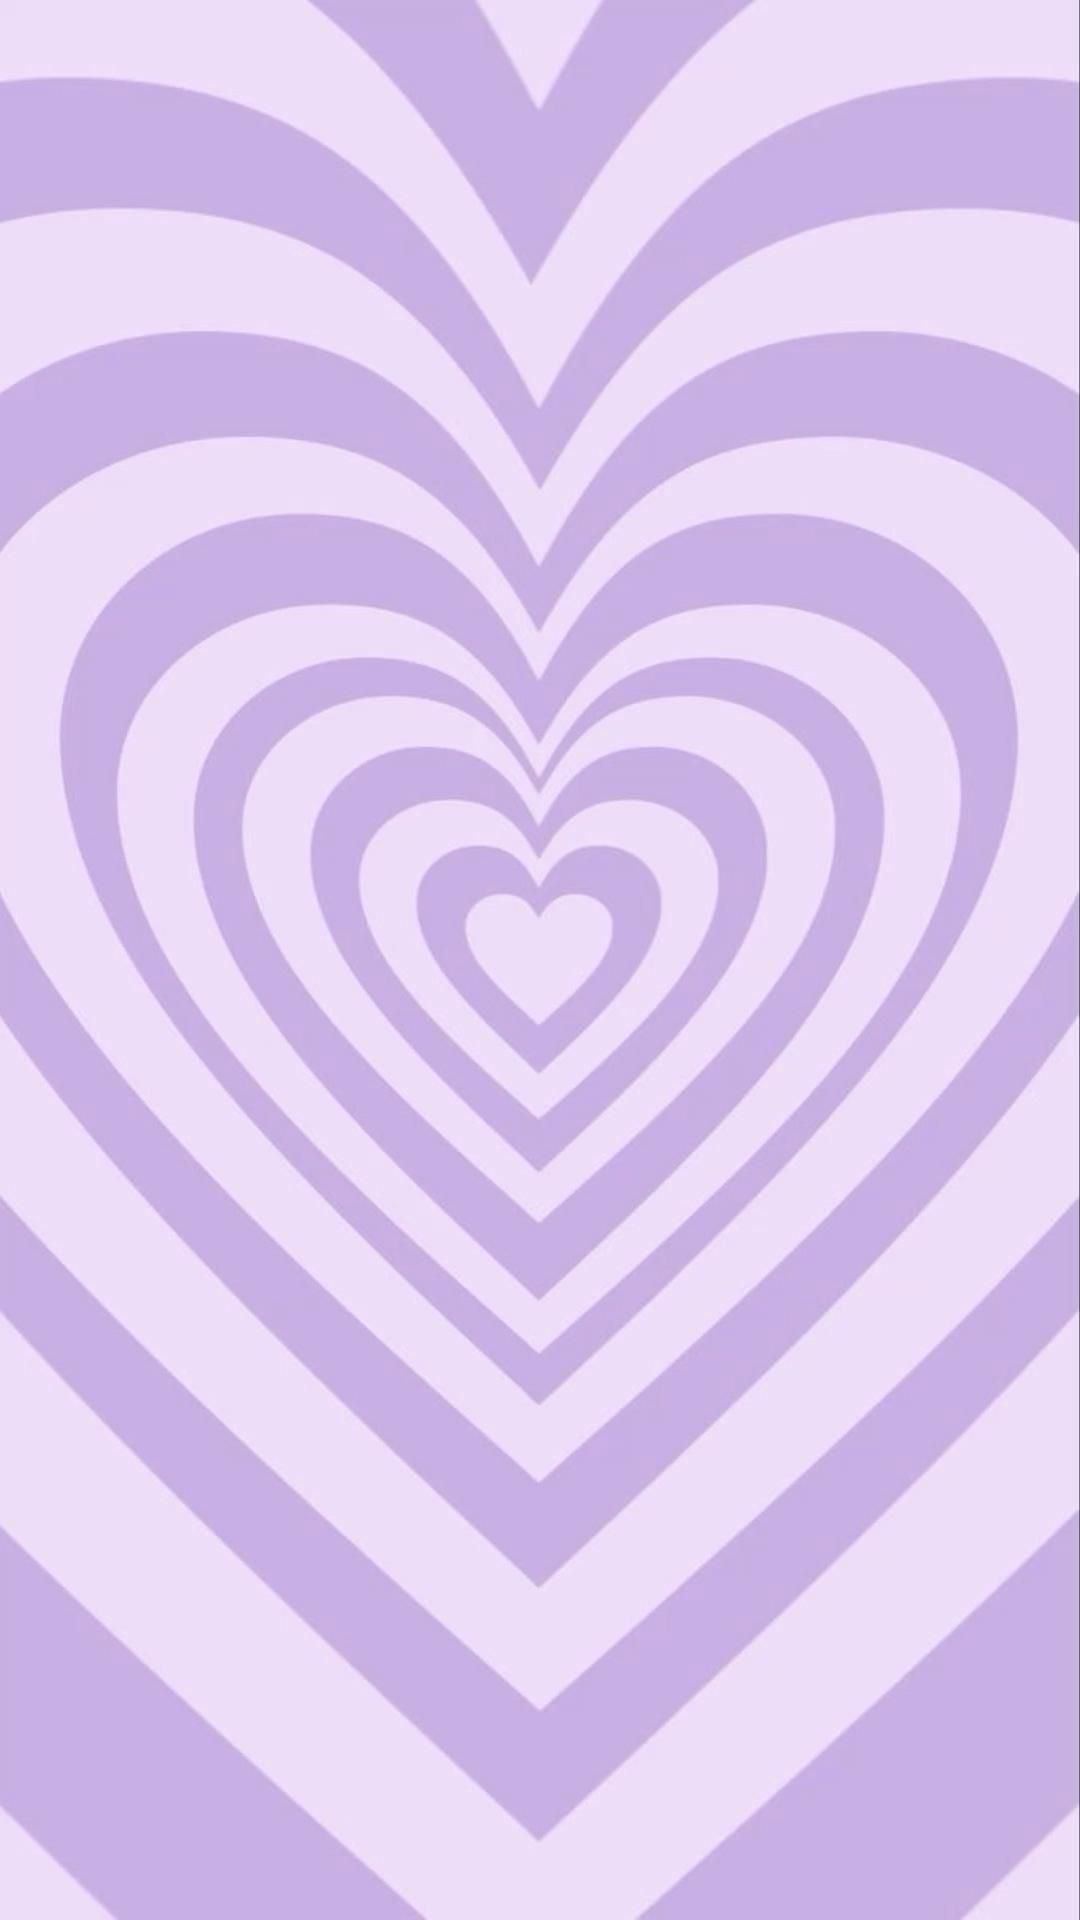 A purple heart shaped design on an abstract background - Light purple